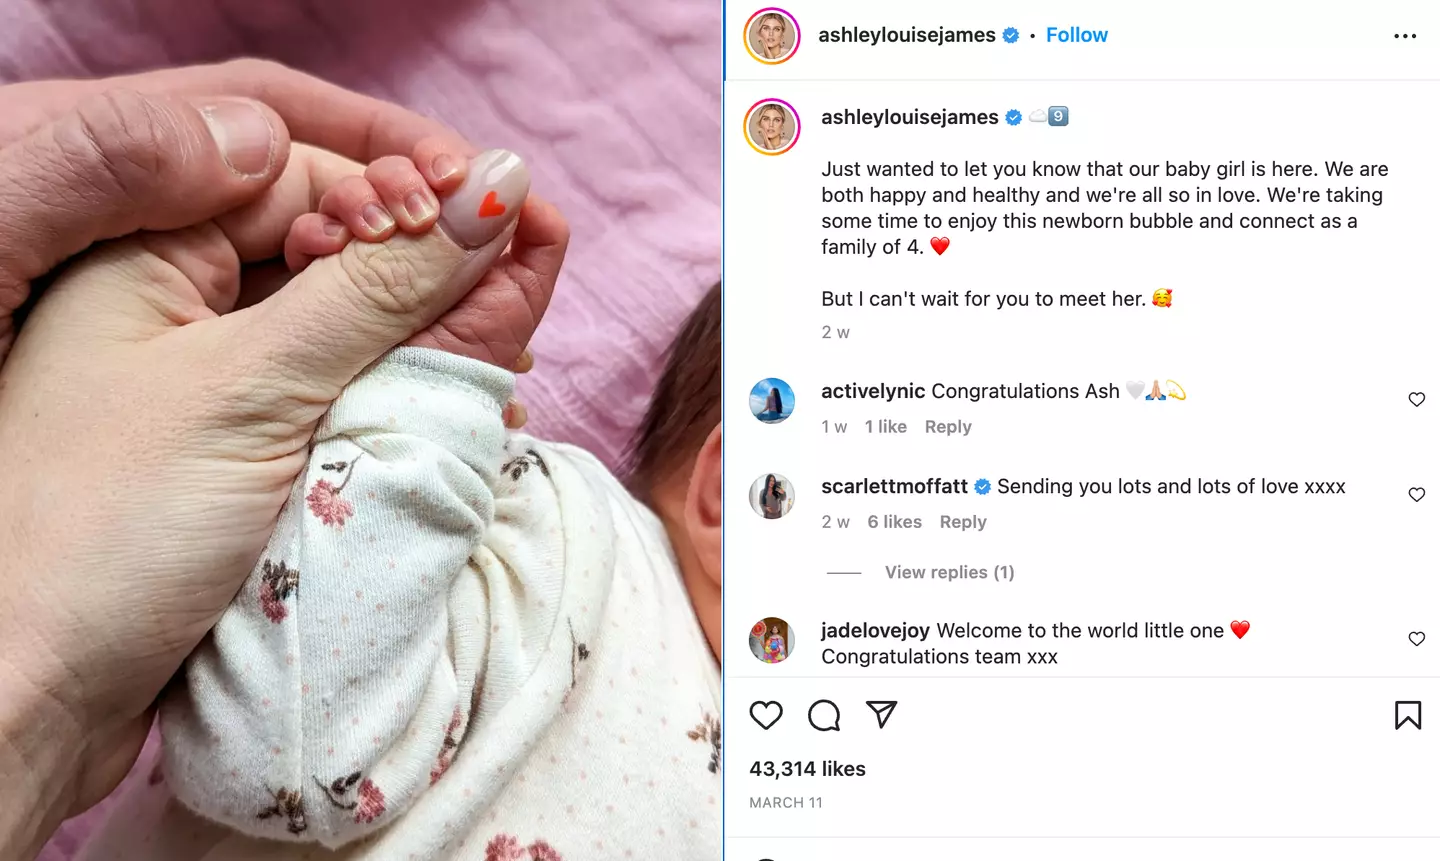 Ashley shared news of her daughter's arrival on Instagram.